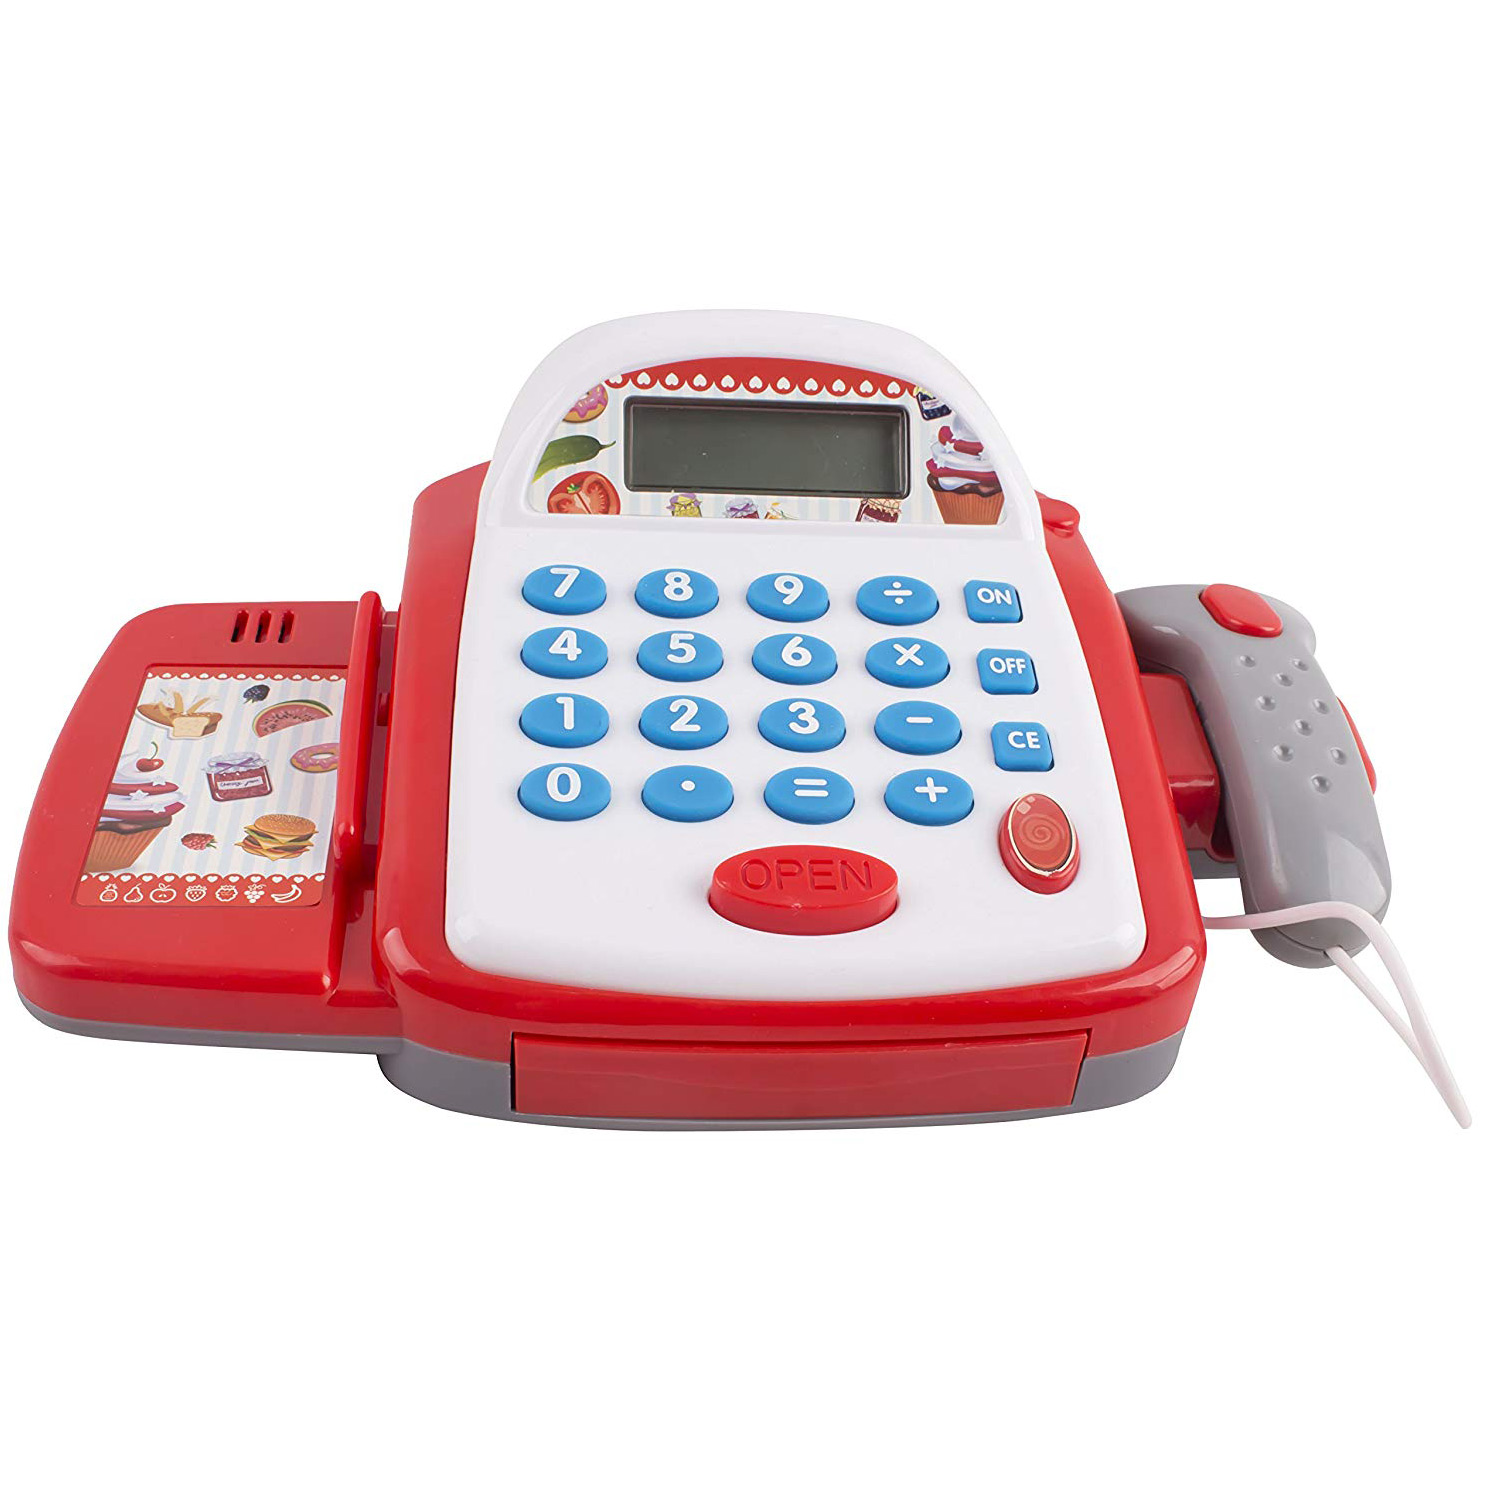 Details about   Cash Register Pretend Play Supermarket Shop Toys with Calculator Telephone,